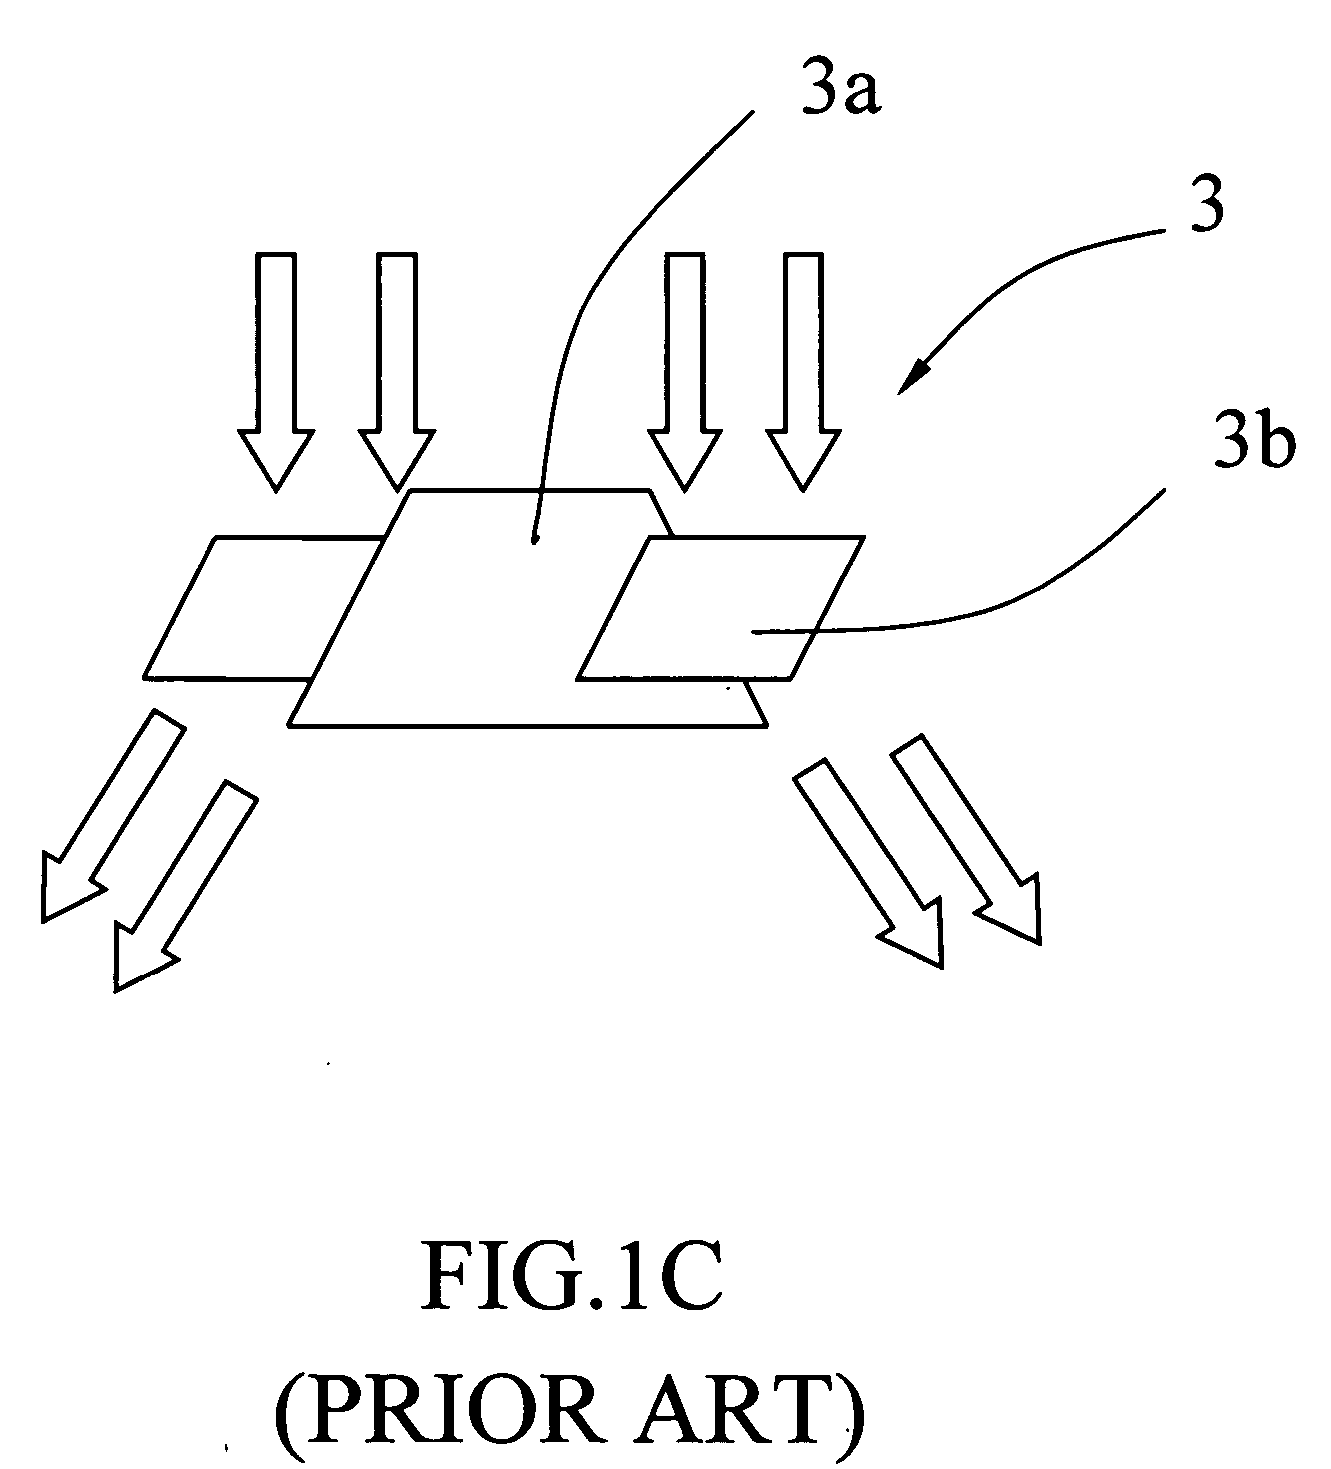 Airflow generating structure and the apparatus thereof